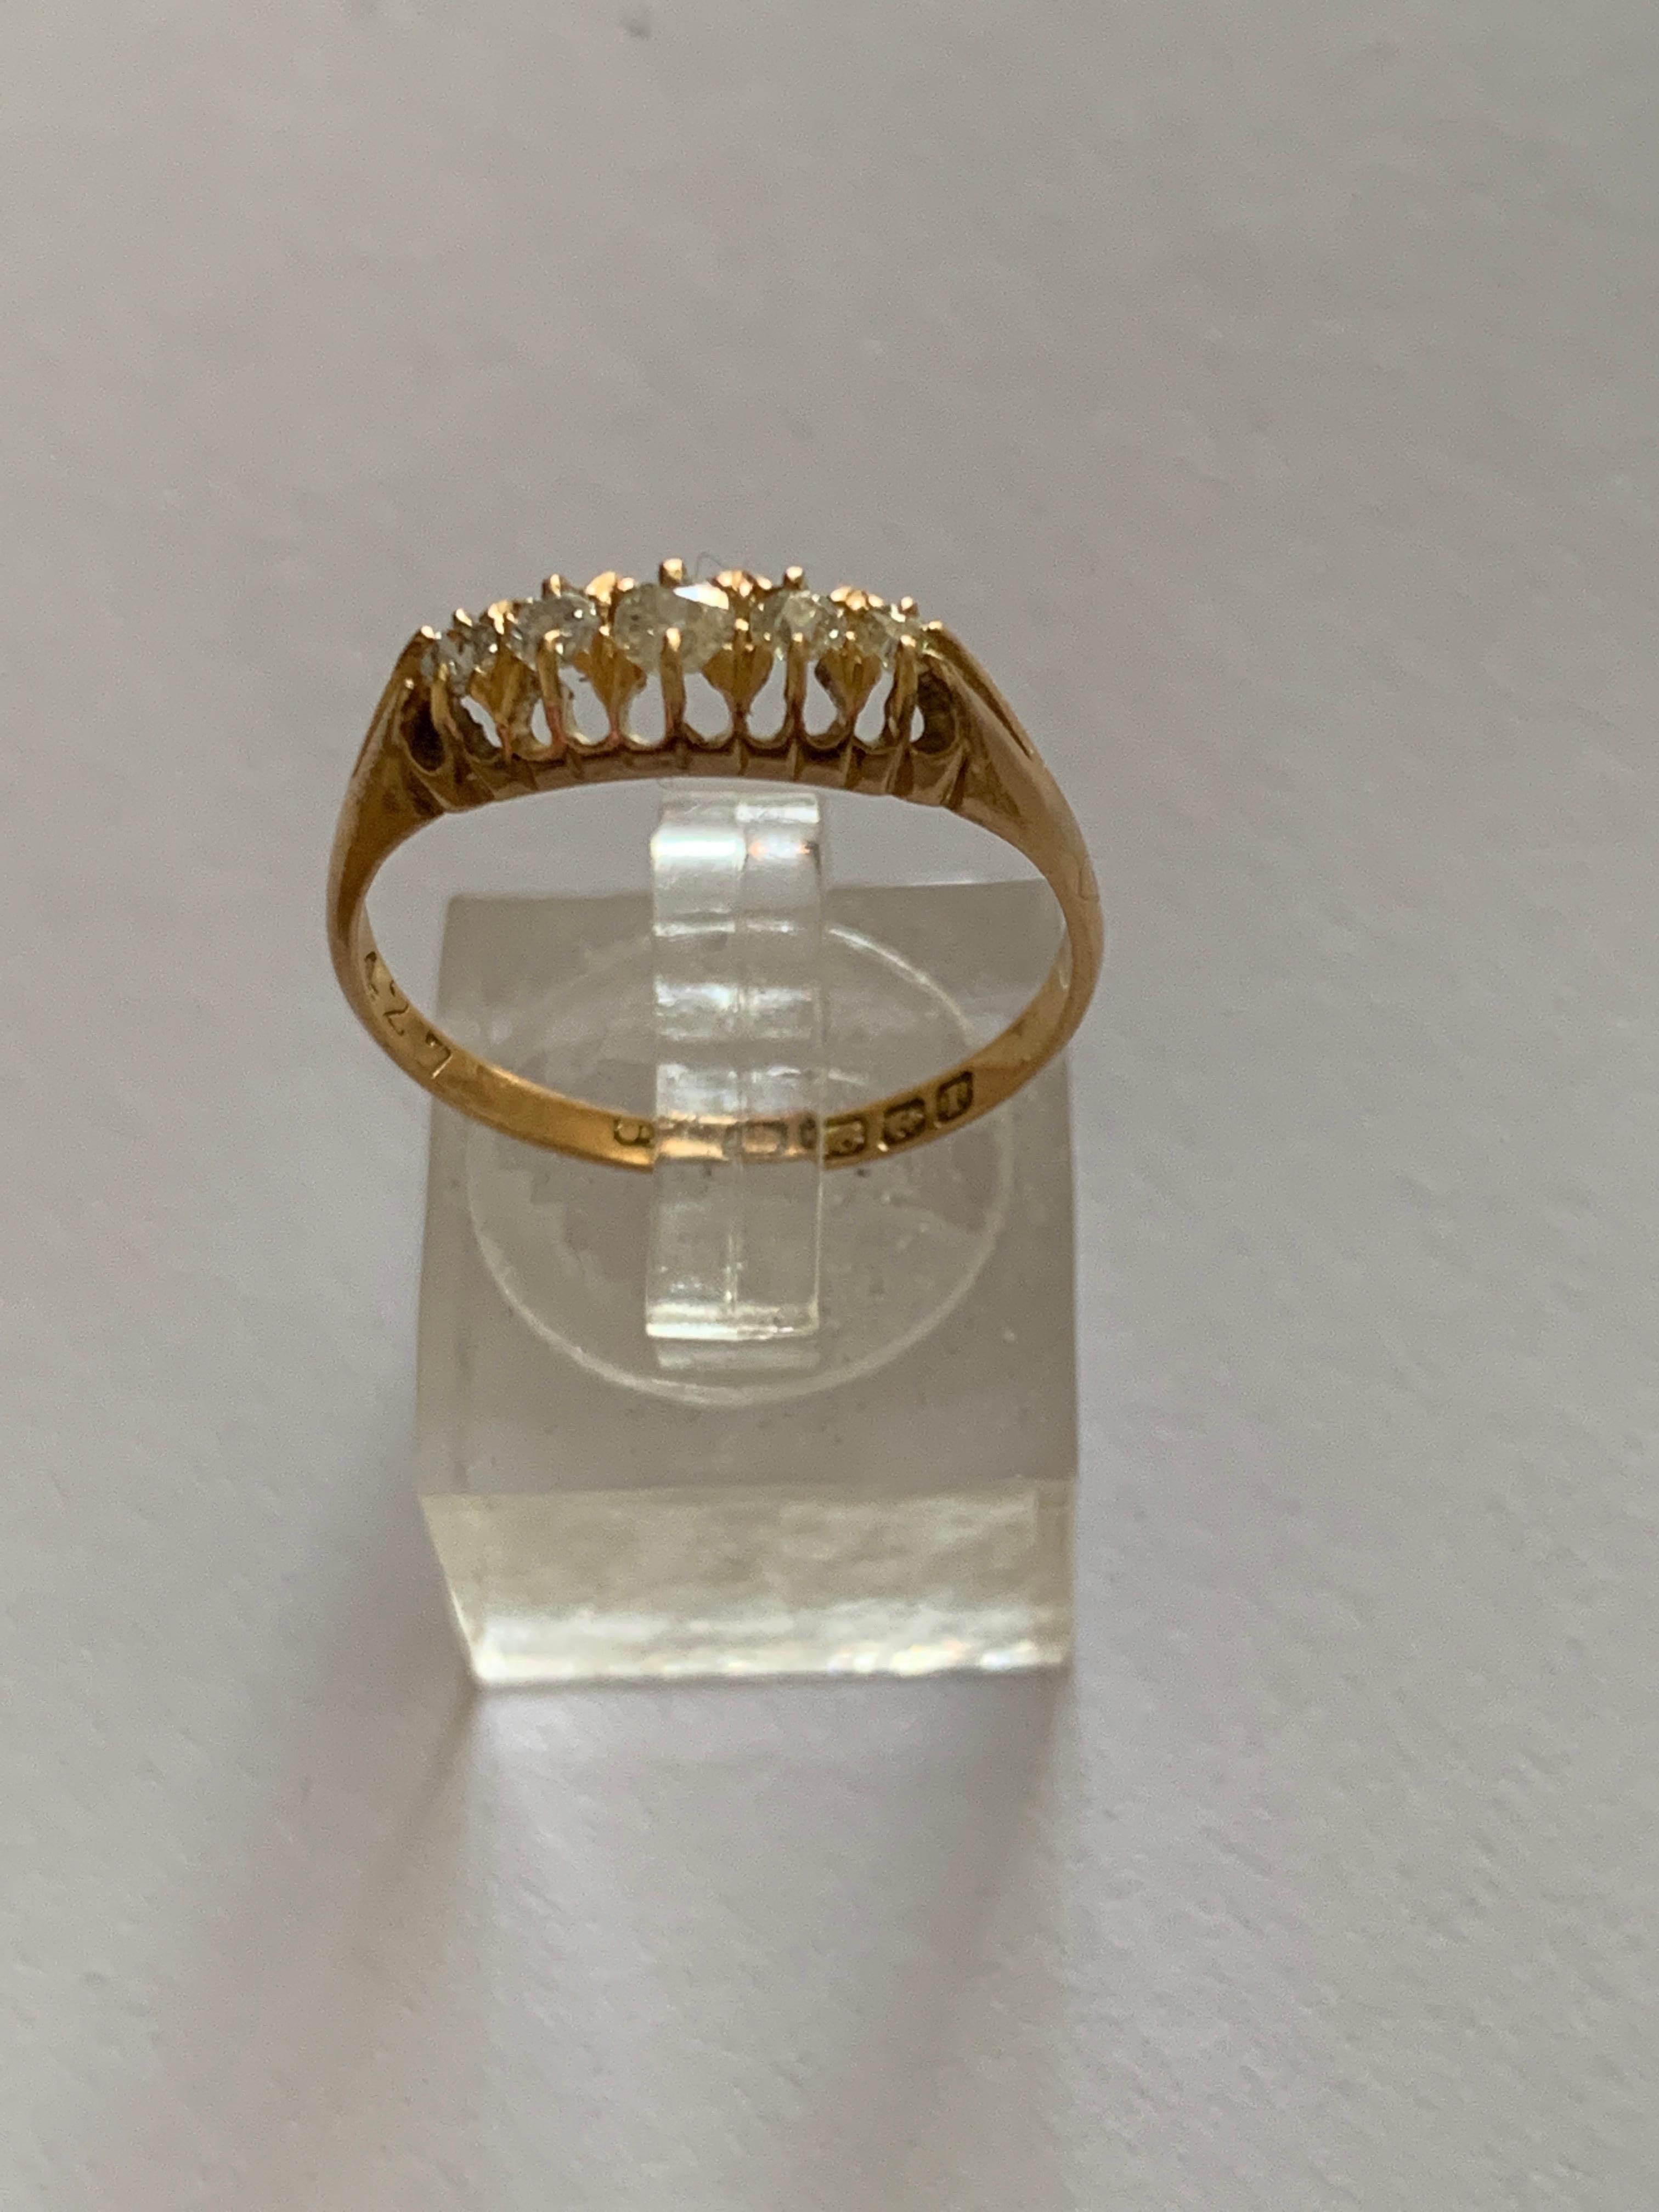 18ct Gold Antique Diamond ring
0.33 Carat
each diamond is a beautiful high quality earth mined diamond
very clear lively diamonds

Size - inner diameter 18.8mm = R 1/2
Weight 2.42 grams

Dated 1857 stamped at Birmingham assay offices.